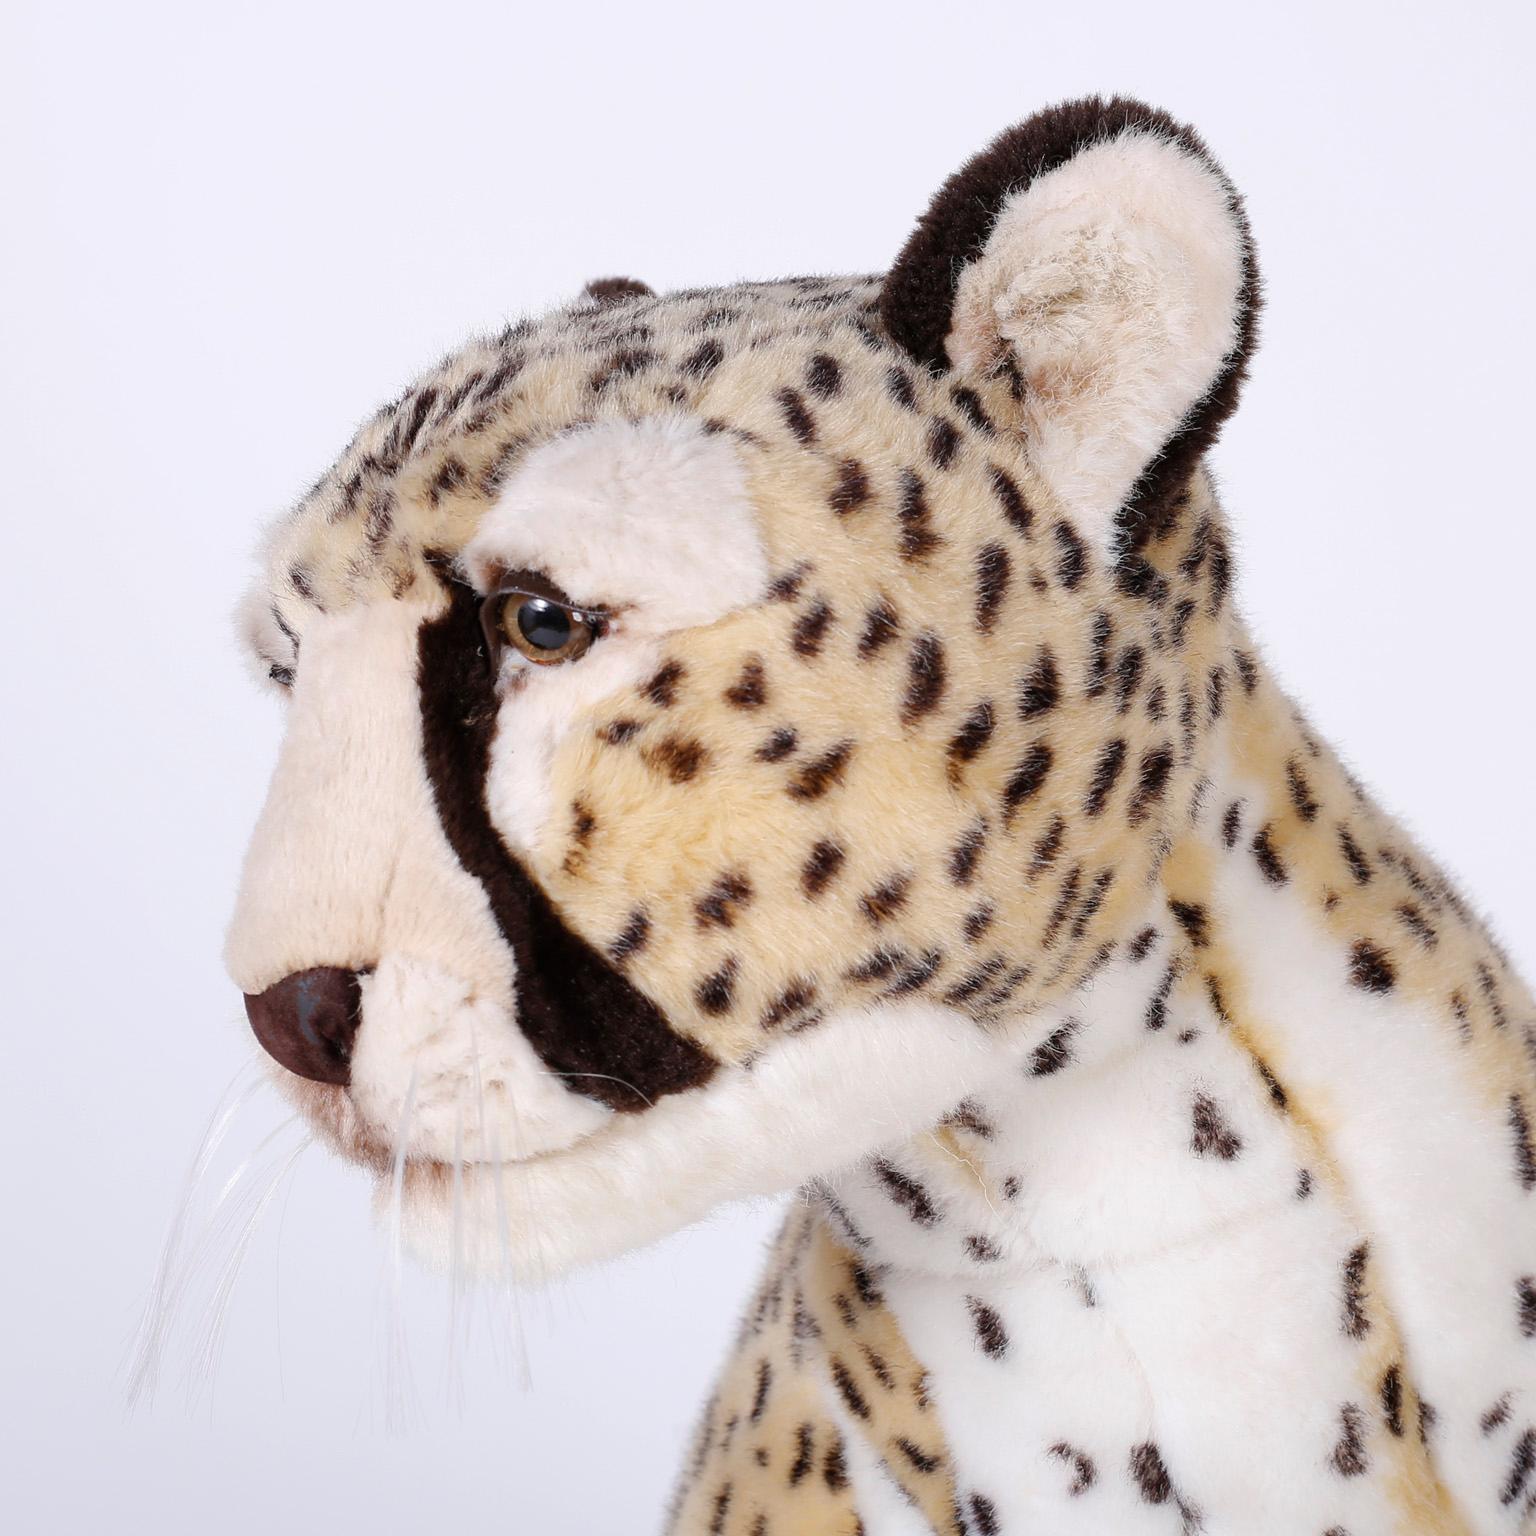 Striking handmade cheetah stuffed animal covered in plush jacquard fabric with distinctive realistic markings, glass eyes, whiskers and an intriguing life like size and stature.